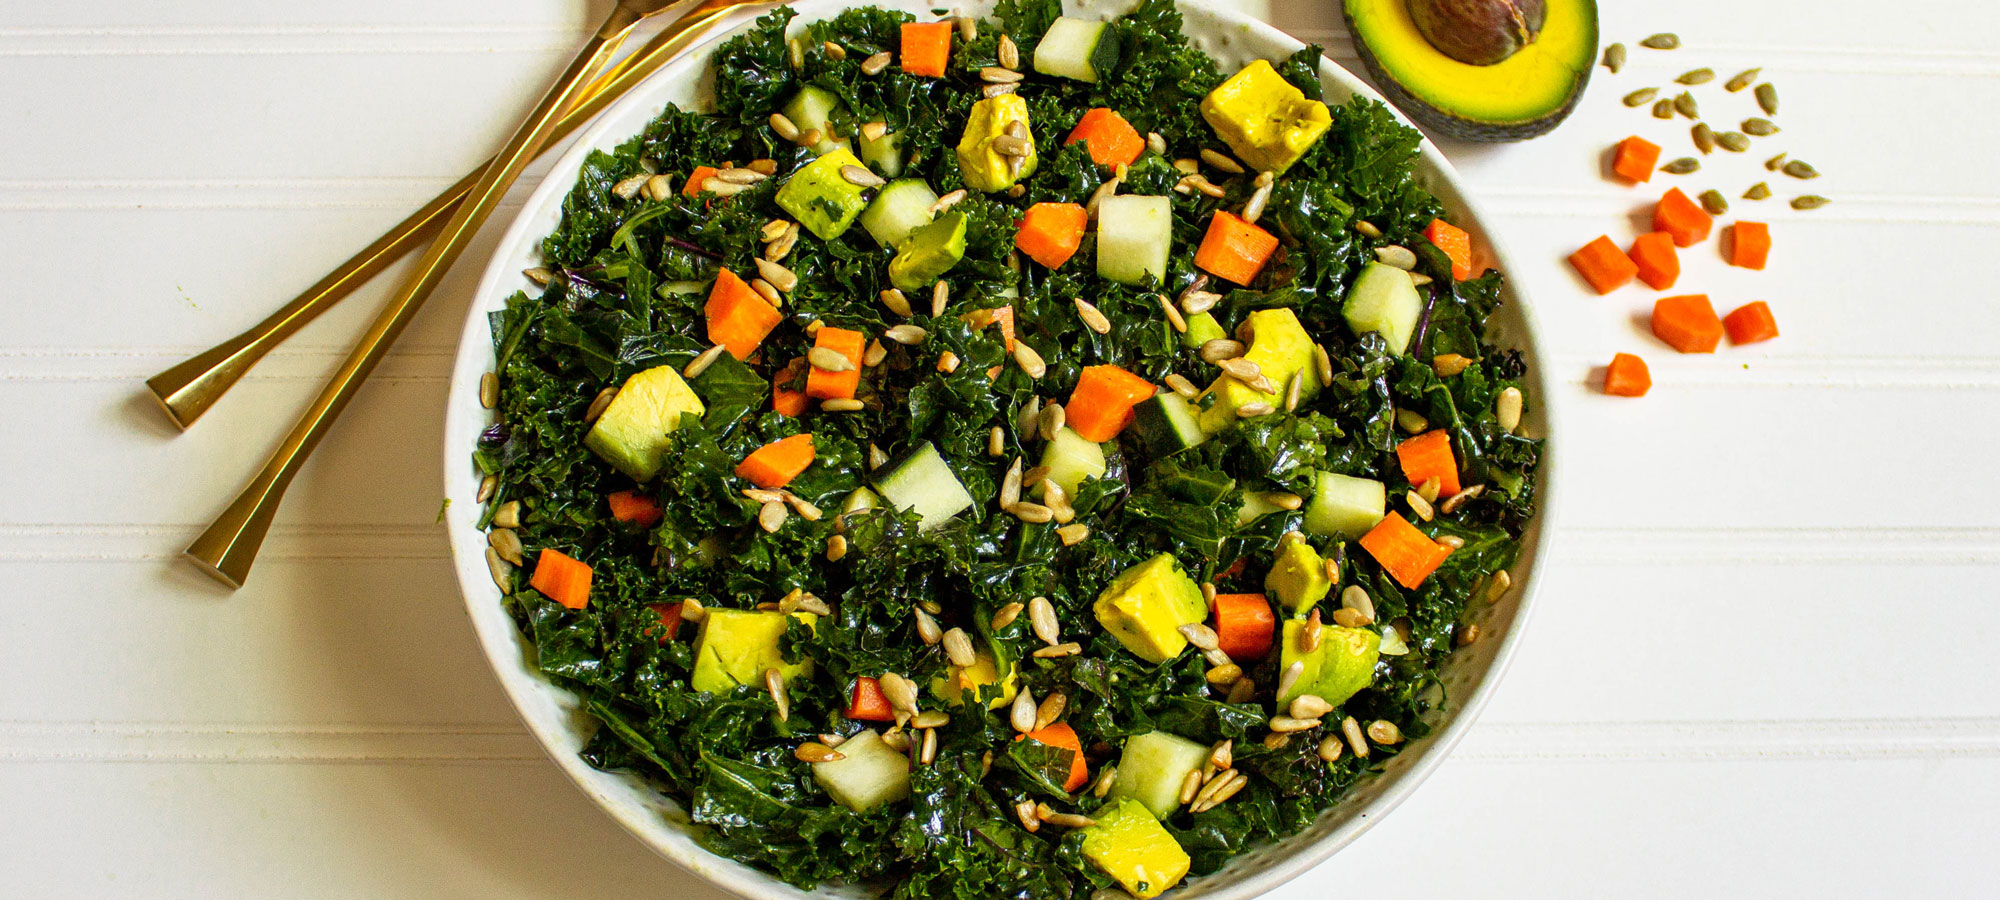 Massaged kale and avocado in bowl